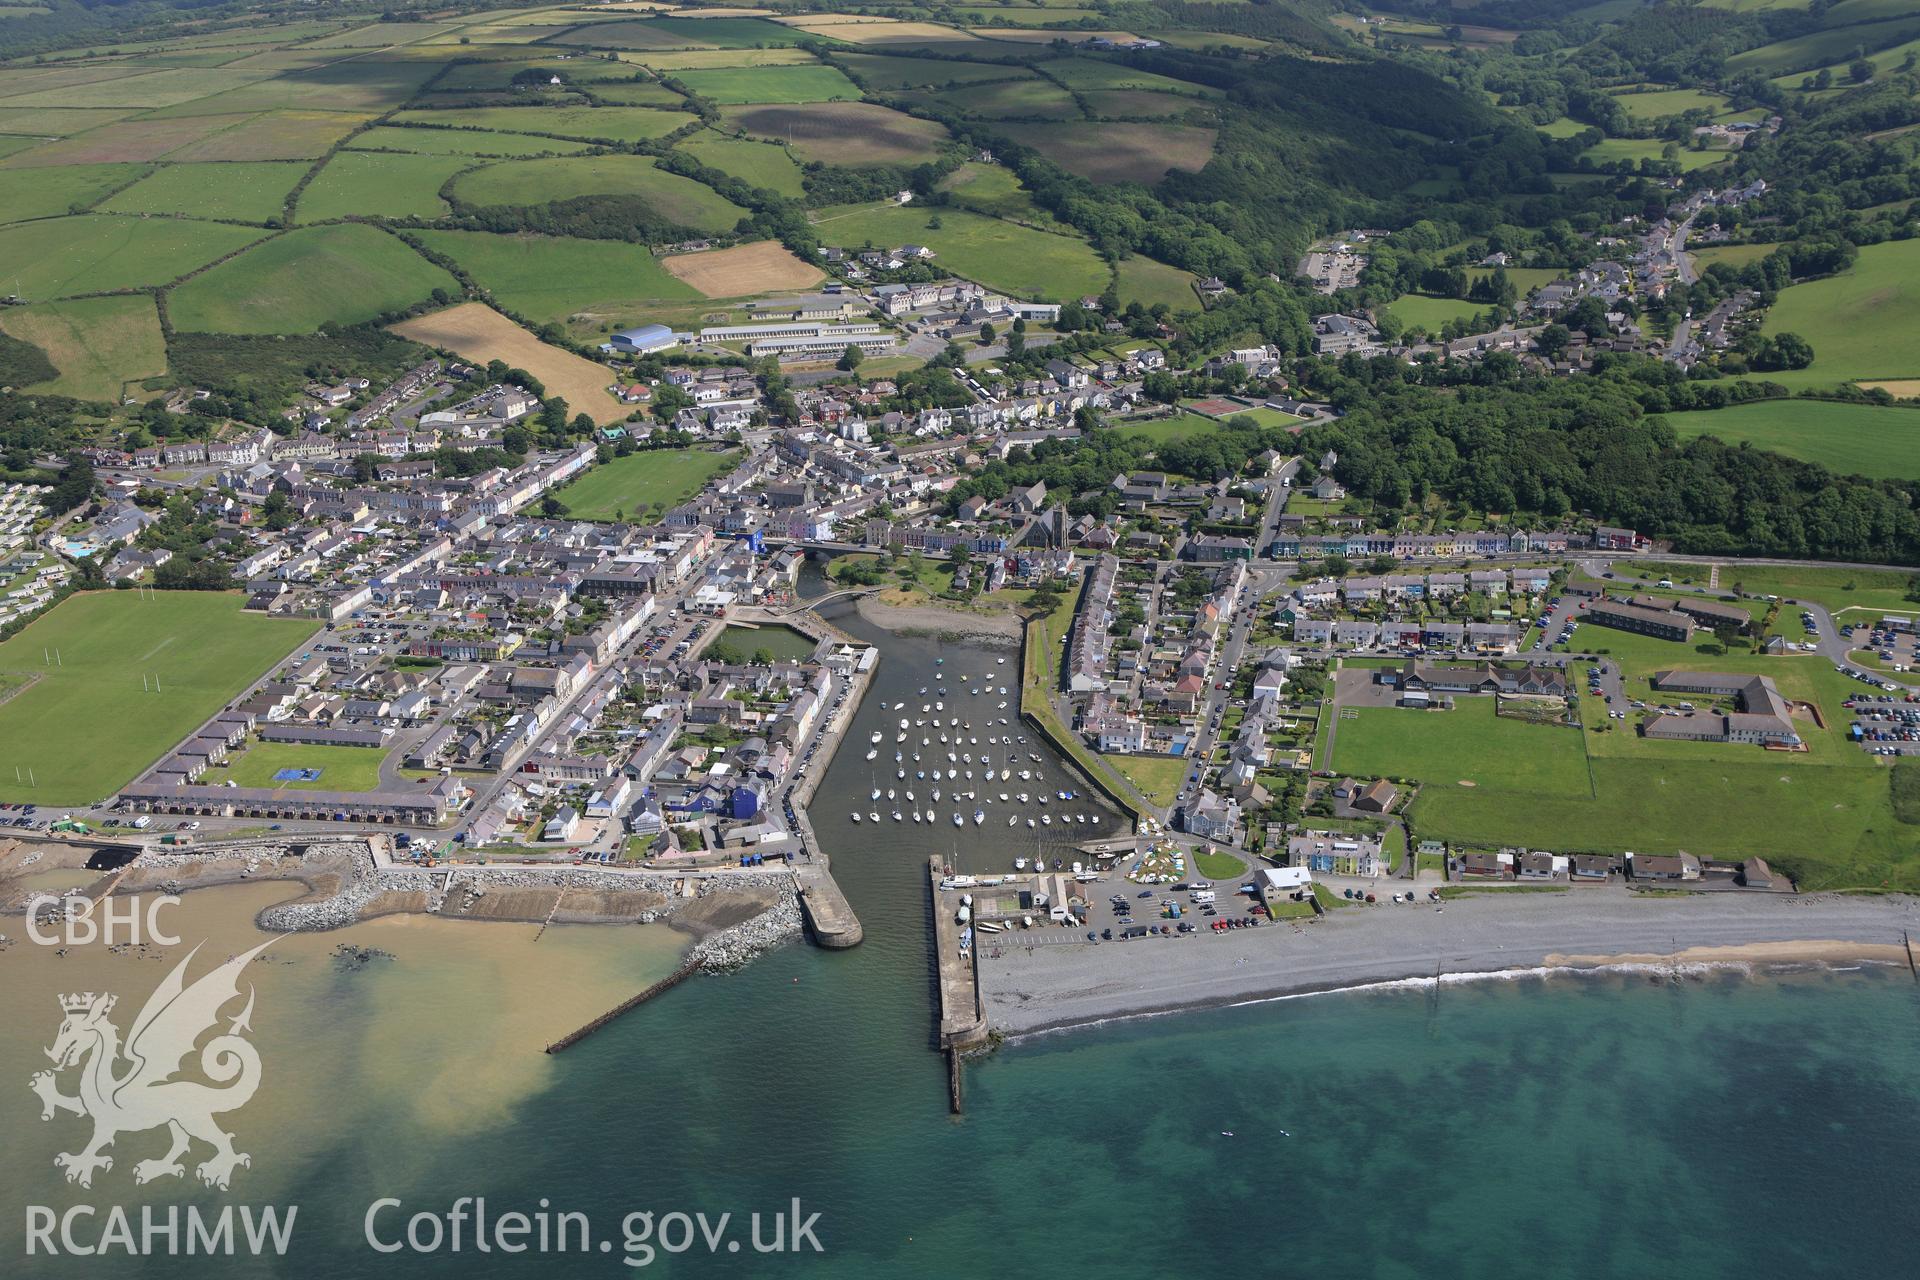 RCAHMW colour oblique aerial photograph of Aberaeron. Taken on 16 June 2009 by Toby Driver